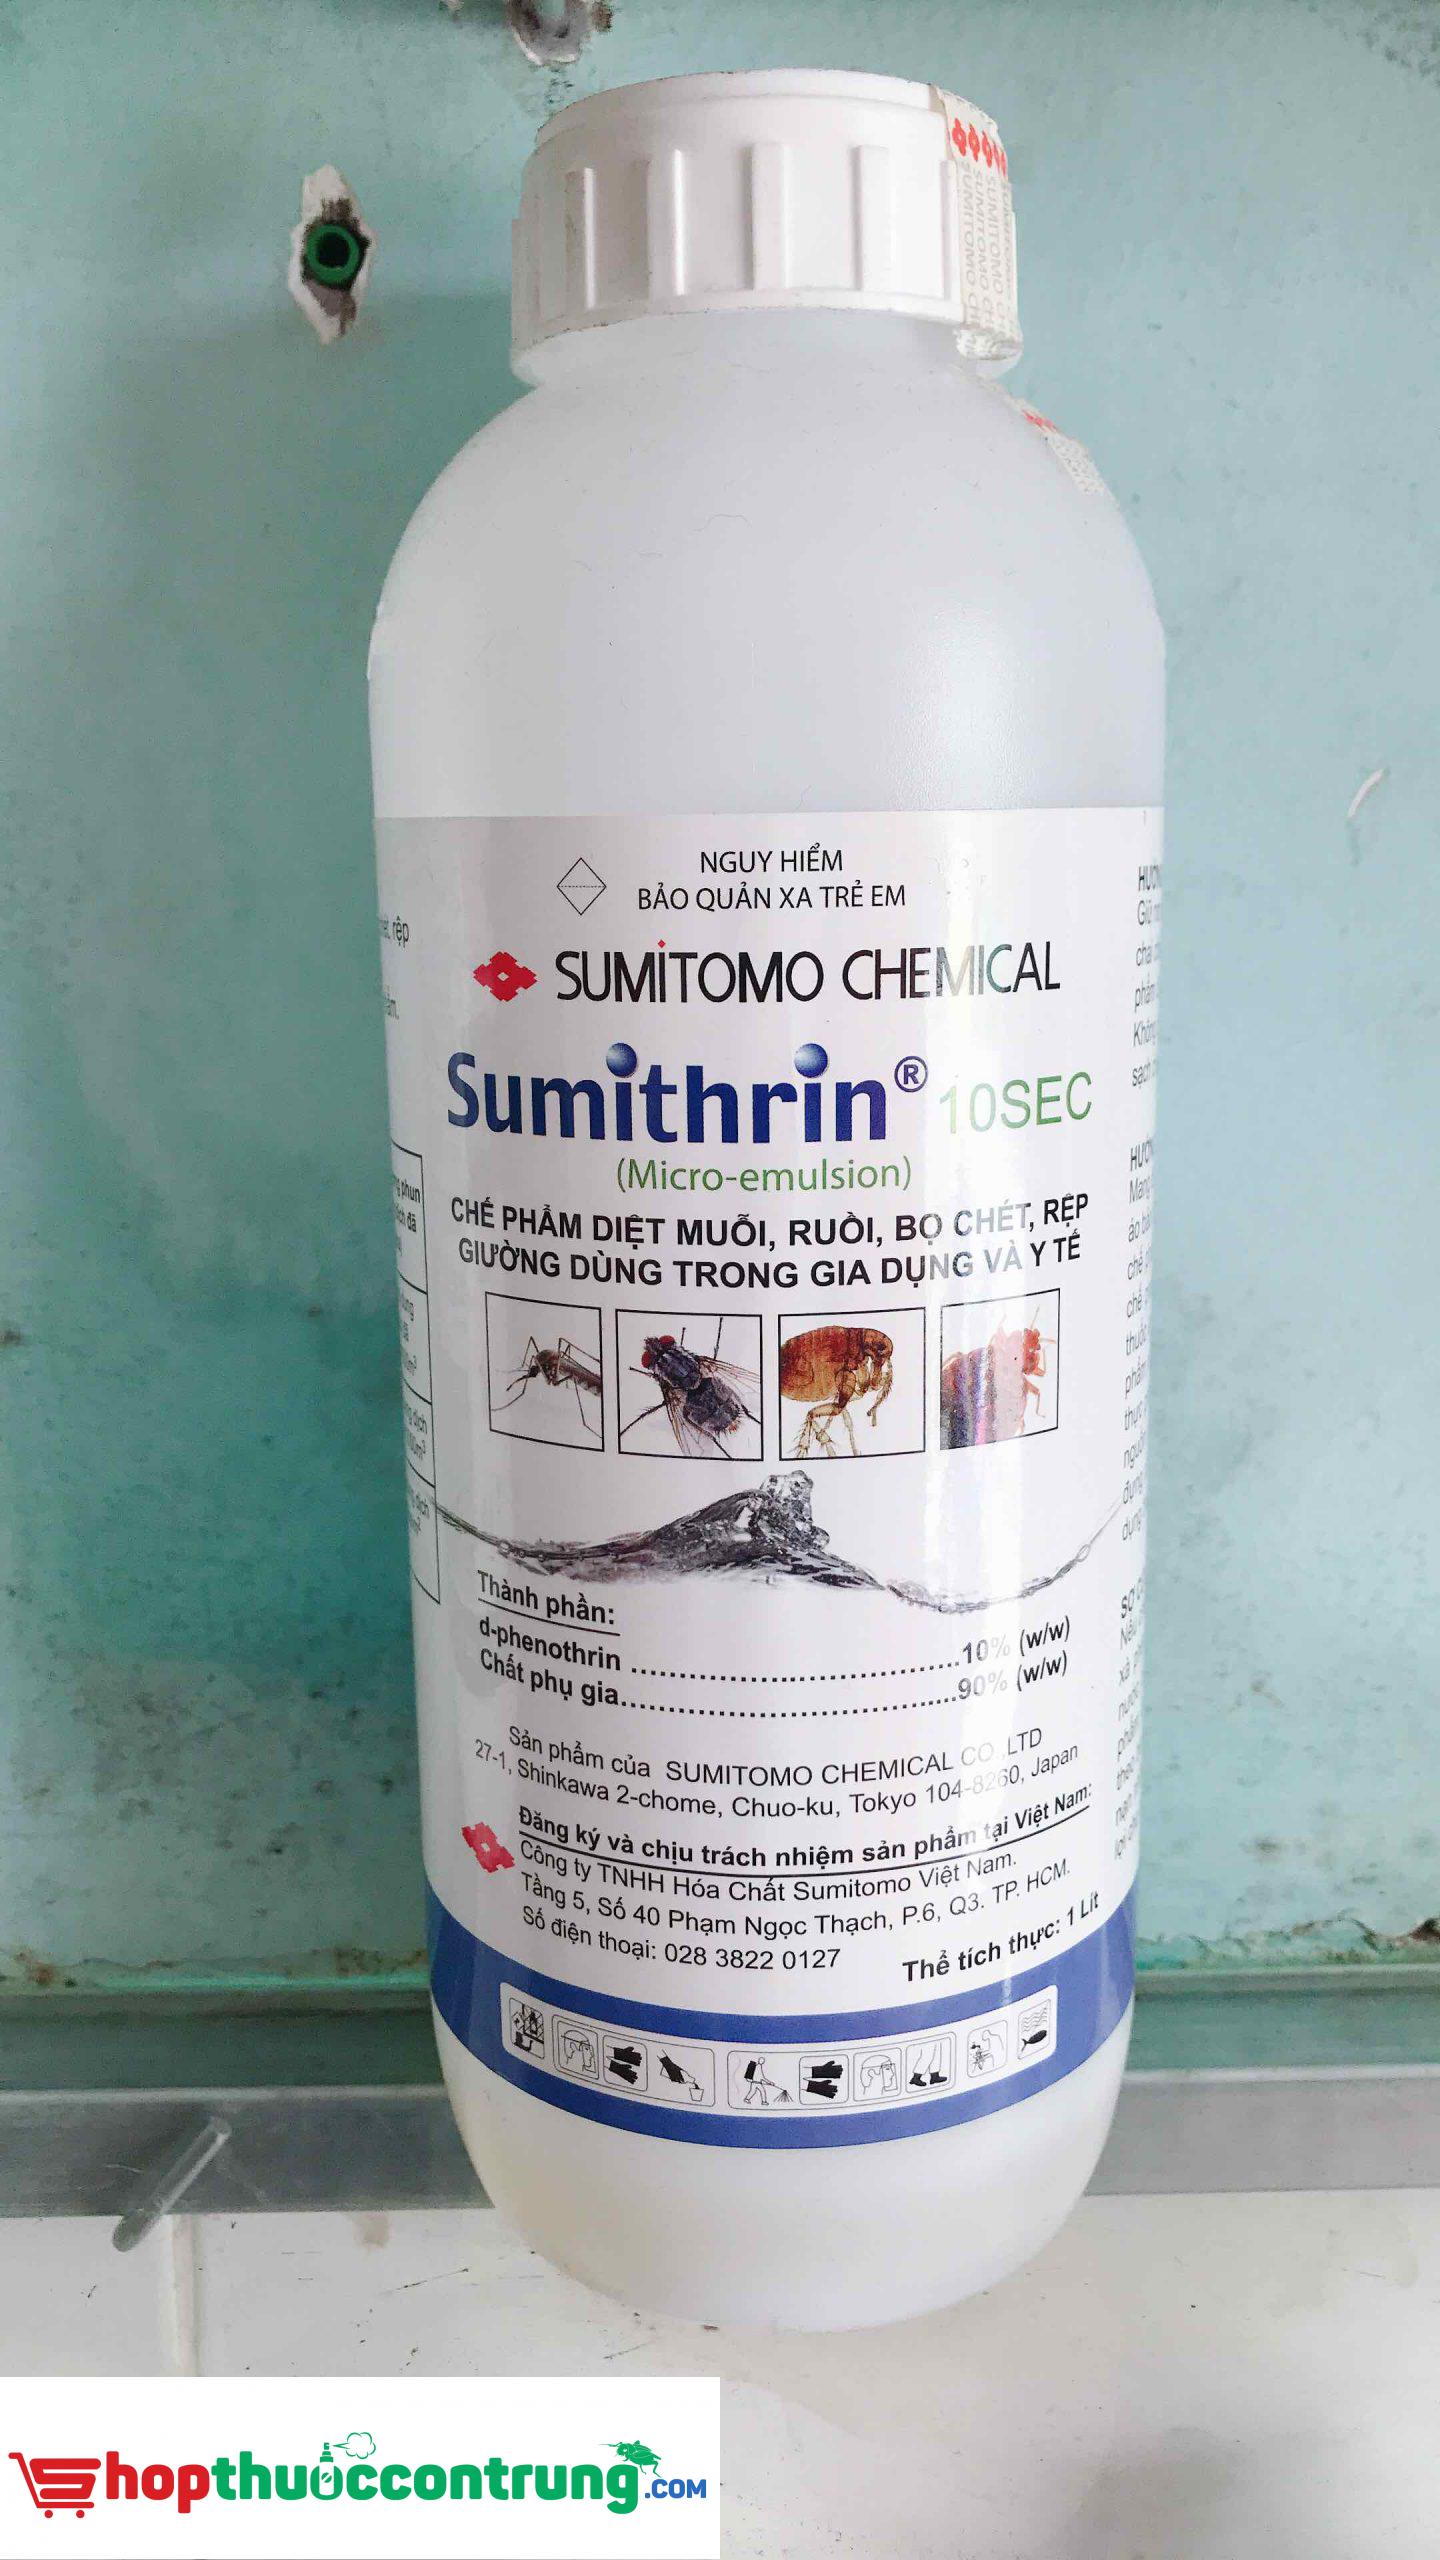 thuoc diet muoi sumithrin 10sec